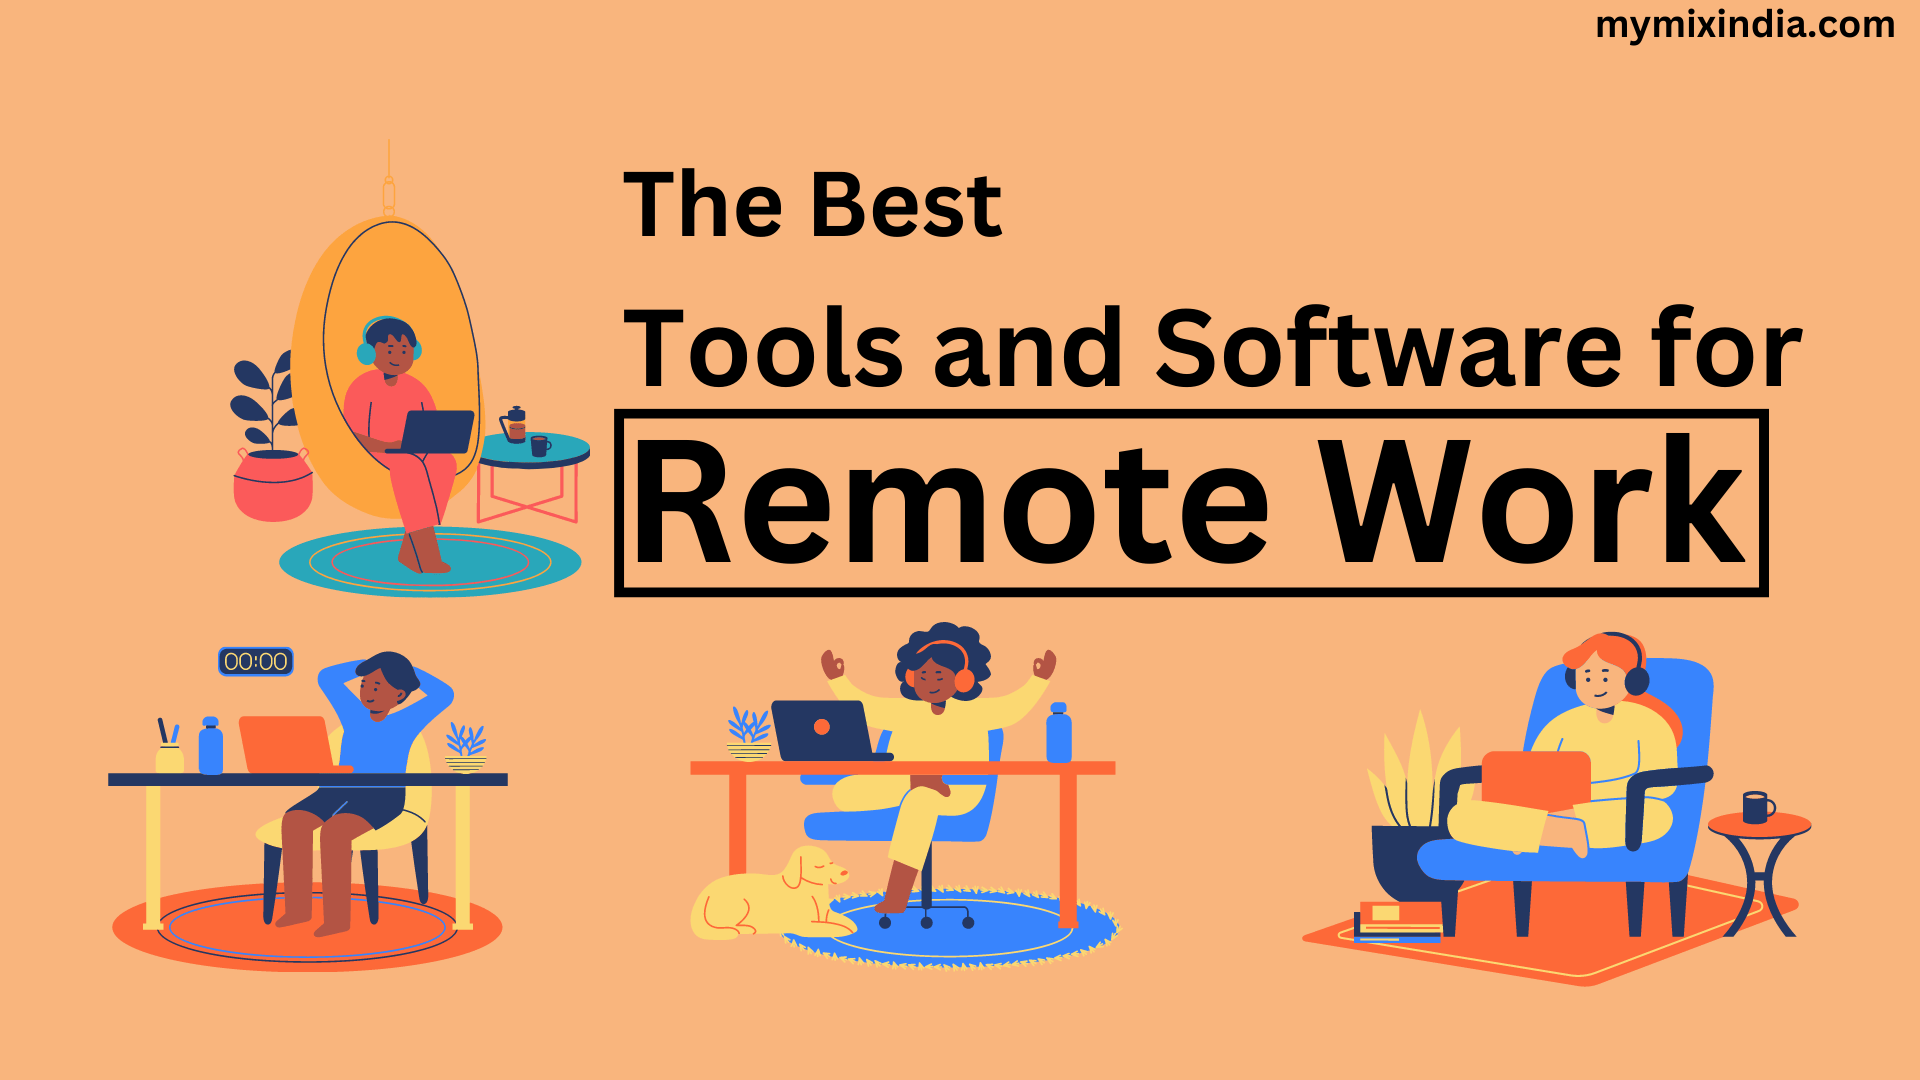 Embrace-Efficiency-and-Collaboration-The-Best-Tools-and-Software-for-Remote-Work-mymixindia.com